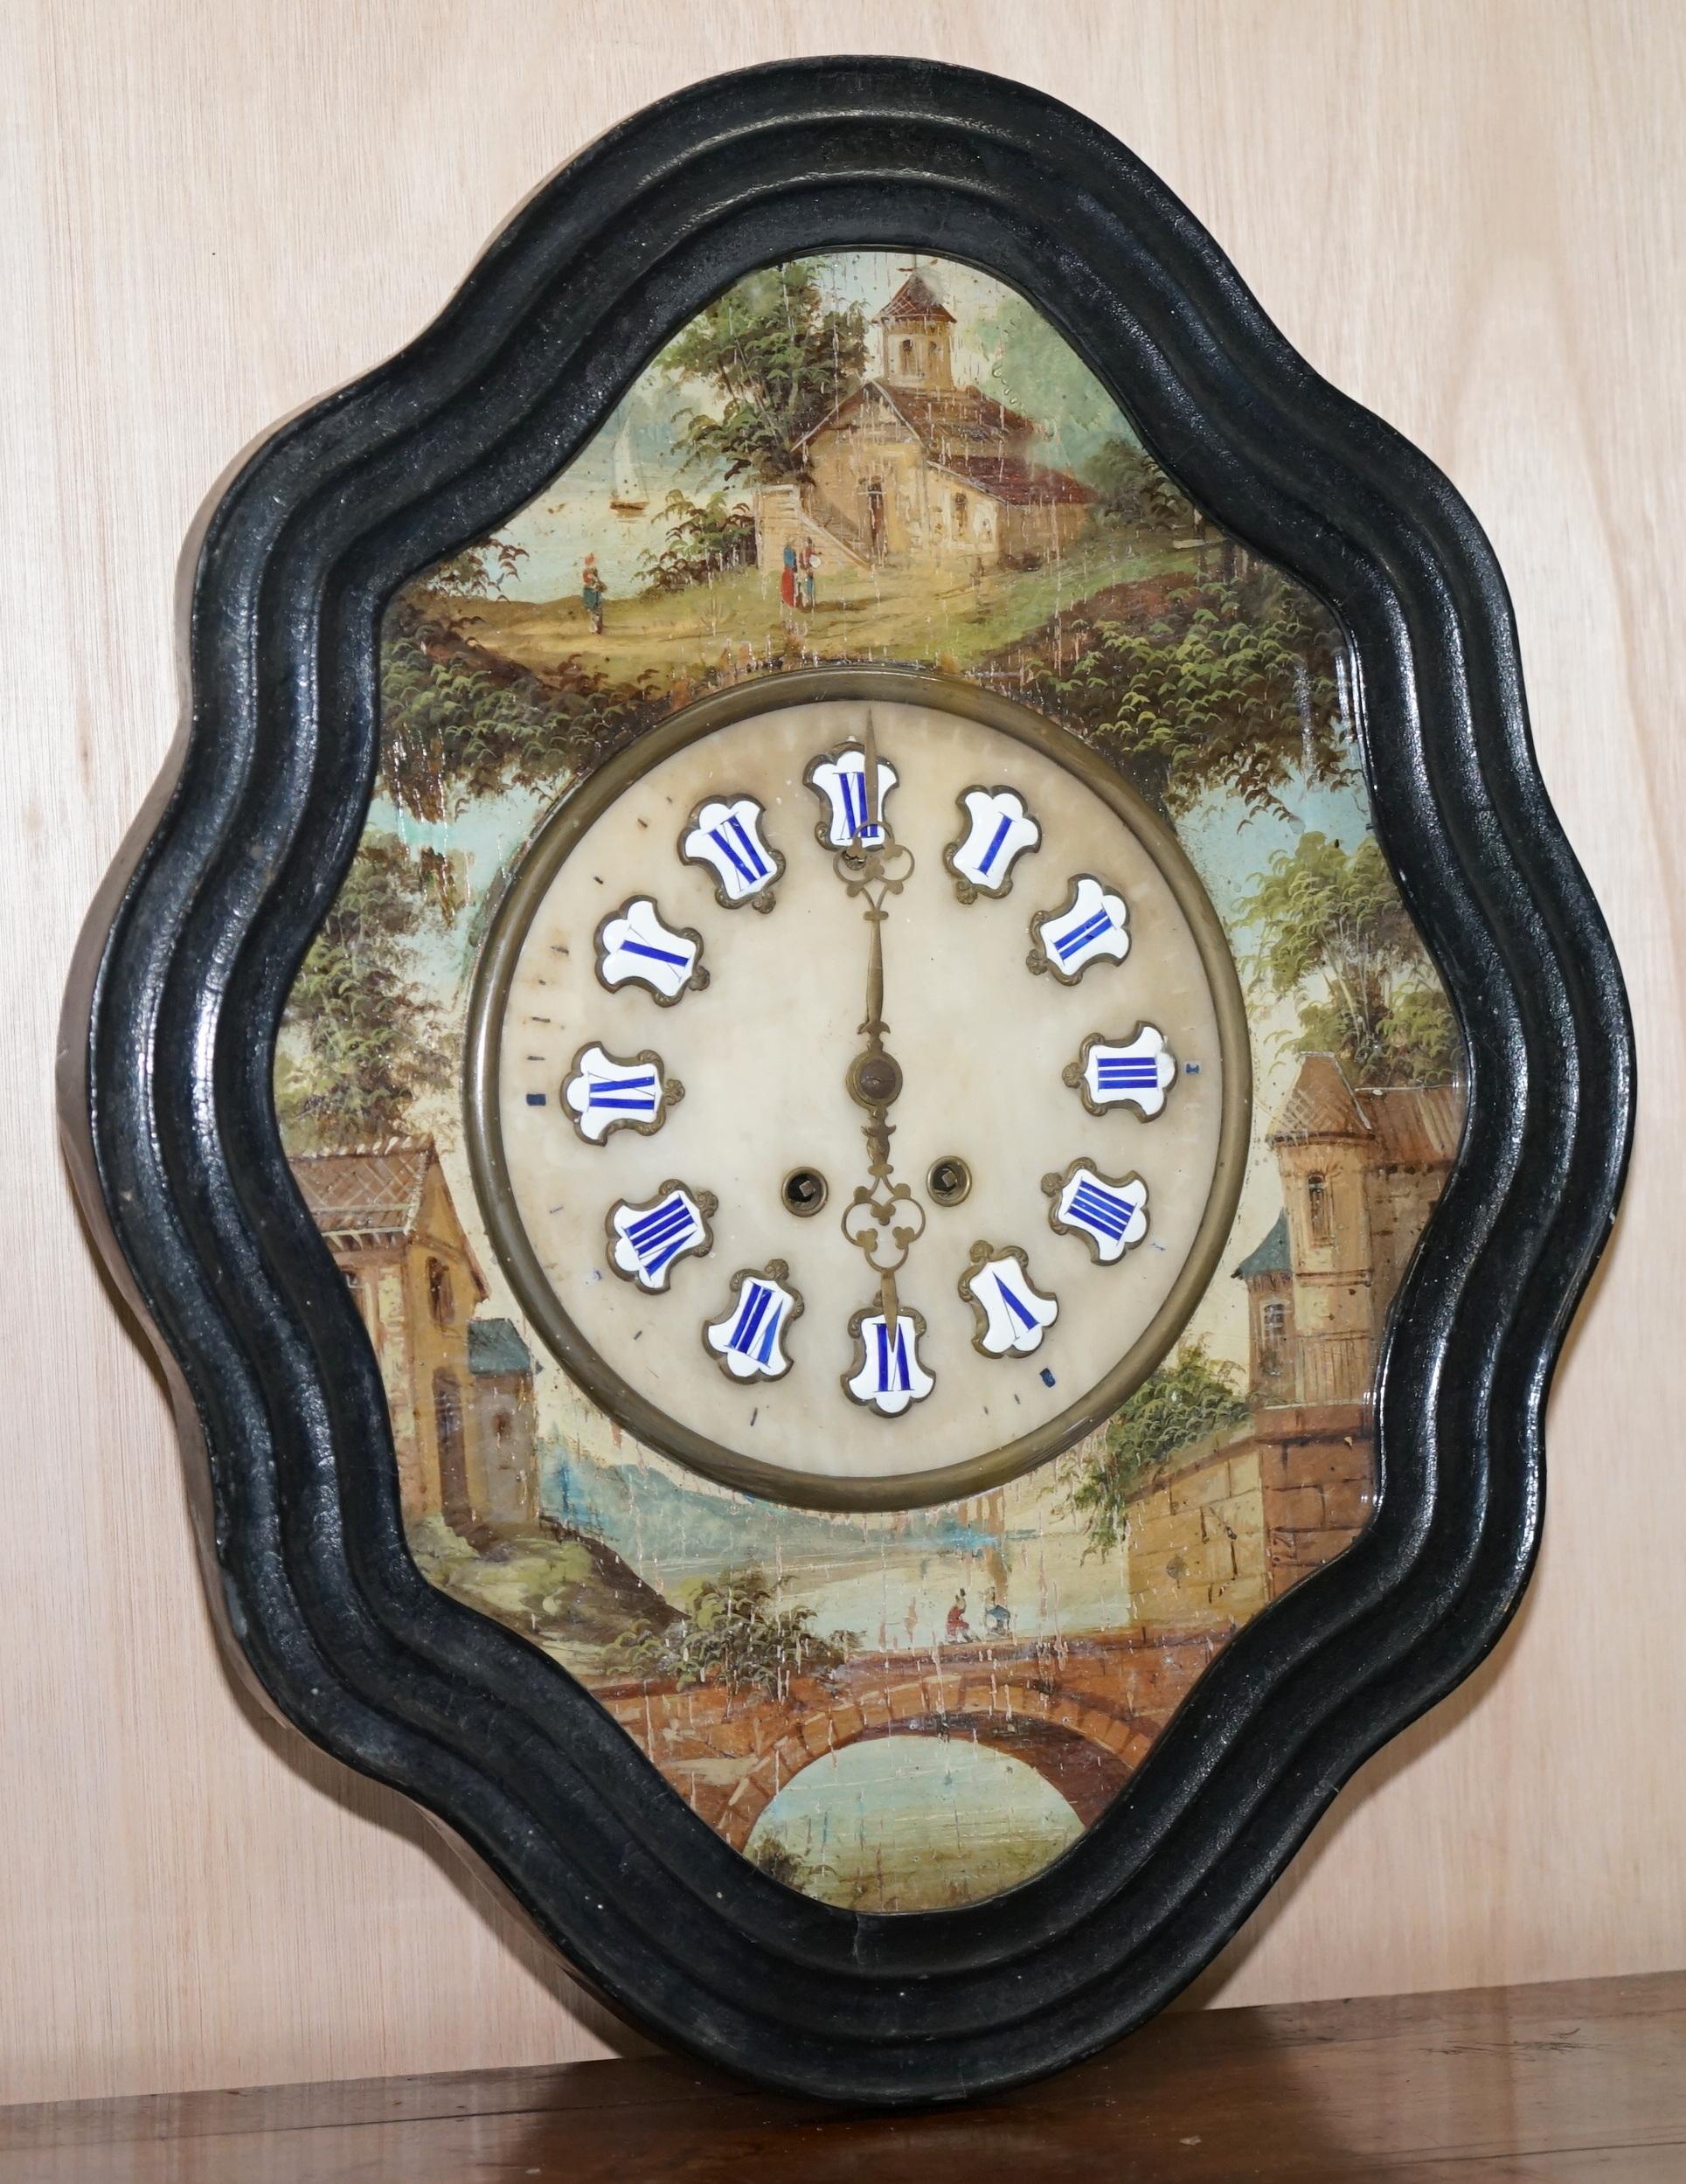 We are delighted to offer for sale this stunning original Napoleon III Oeil De Boeuf wall mounted clock with hand painted rural scene

An absolutely stunning hand painted piece, it would look amazing in any setting

I bought this from a clock